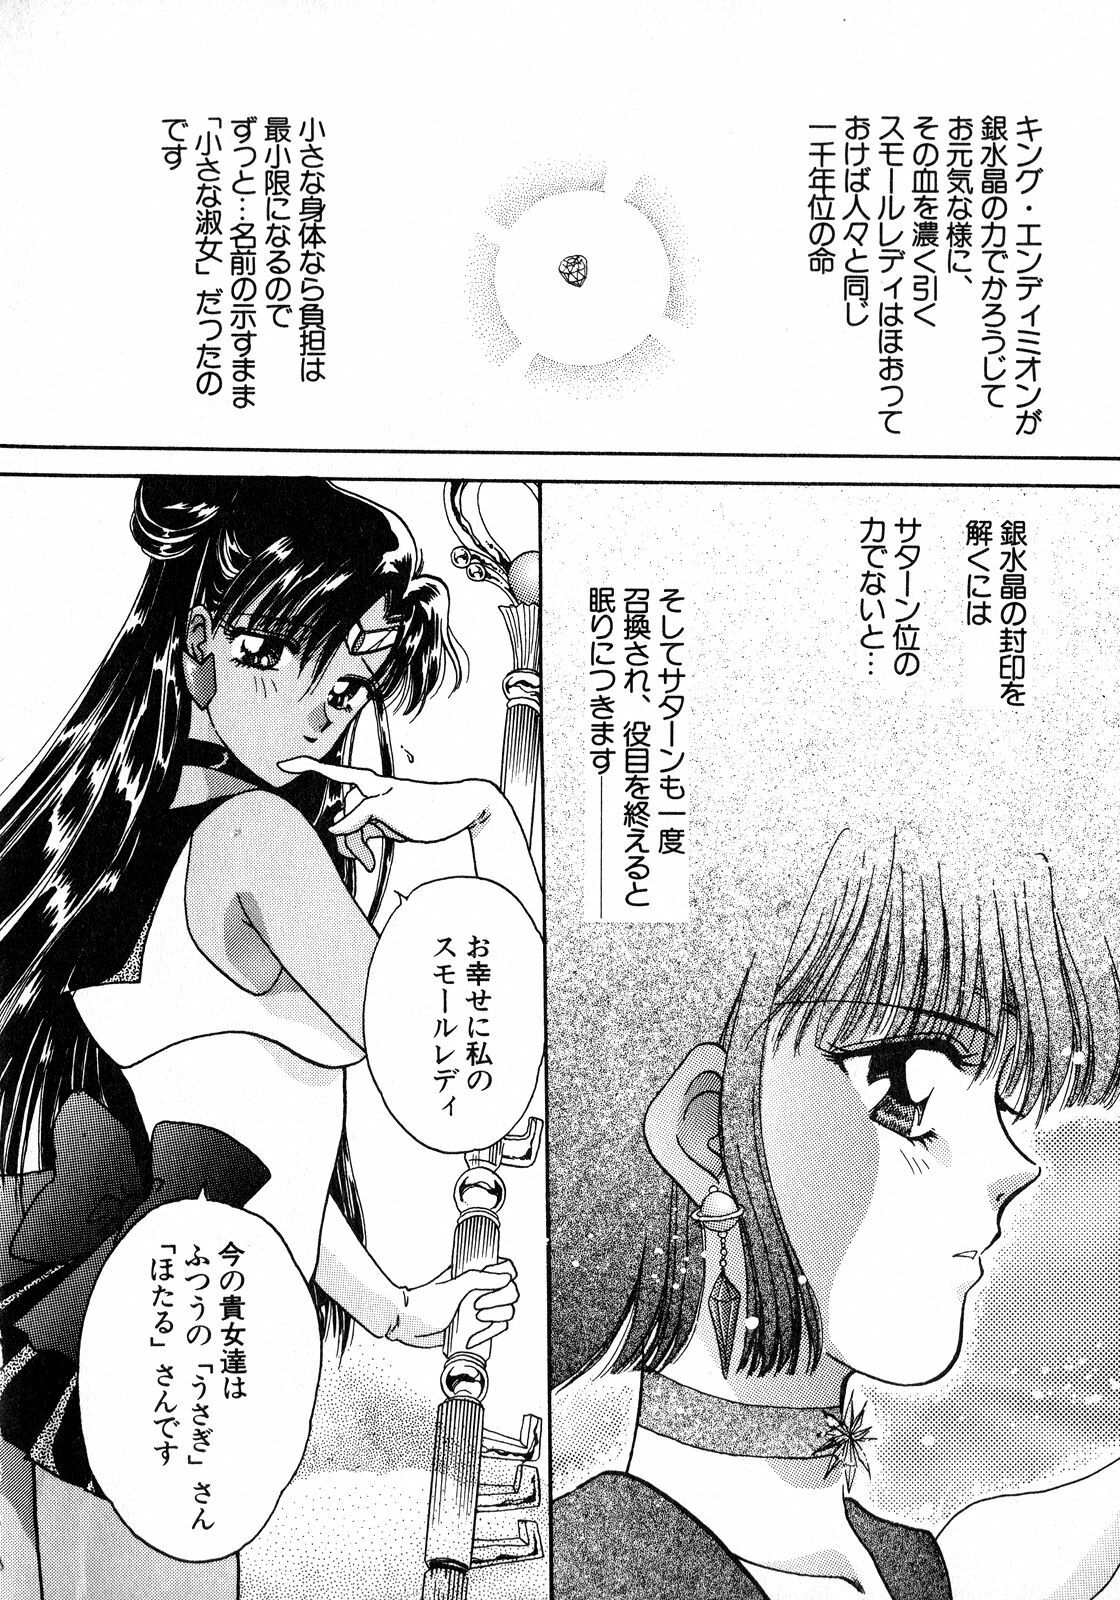 [Anthology] Lunatic Party 8 (Sailor Moon) page 19 full